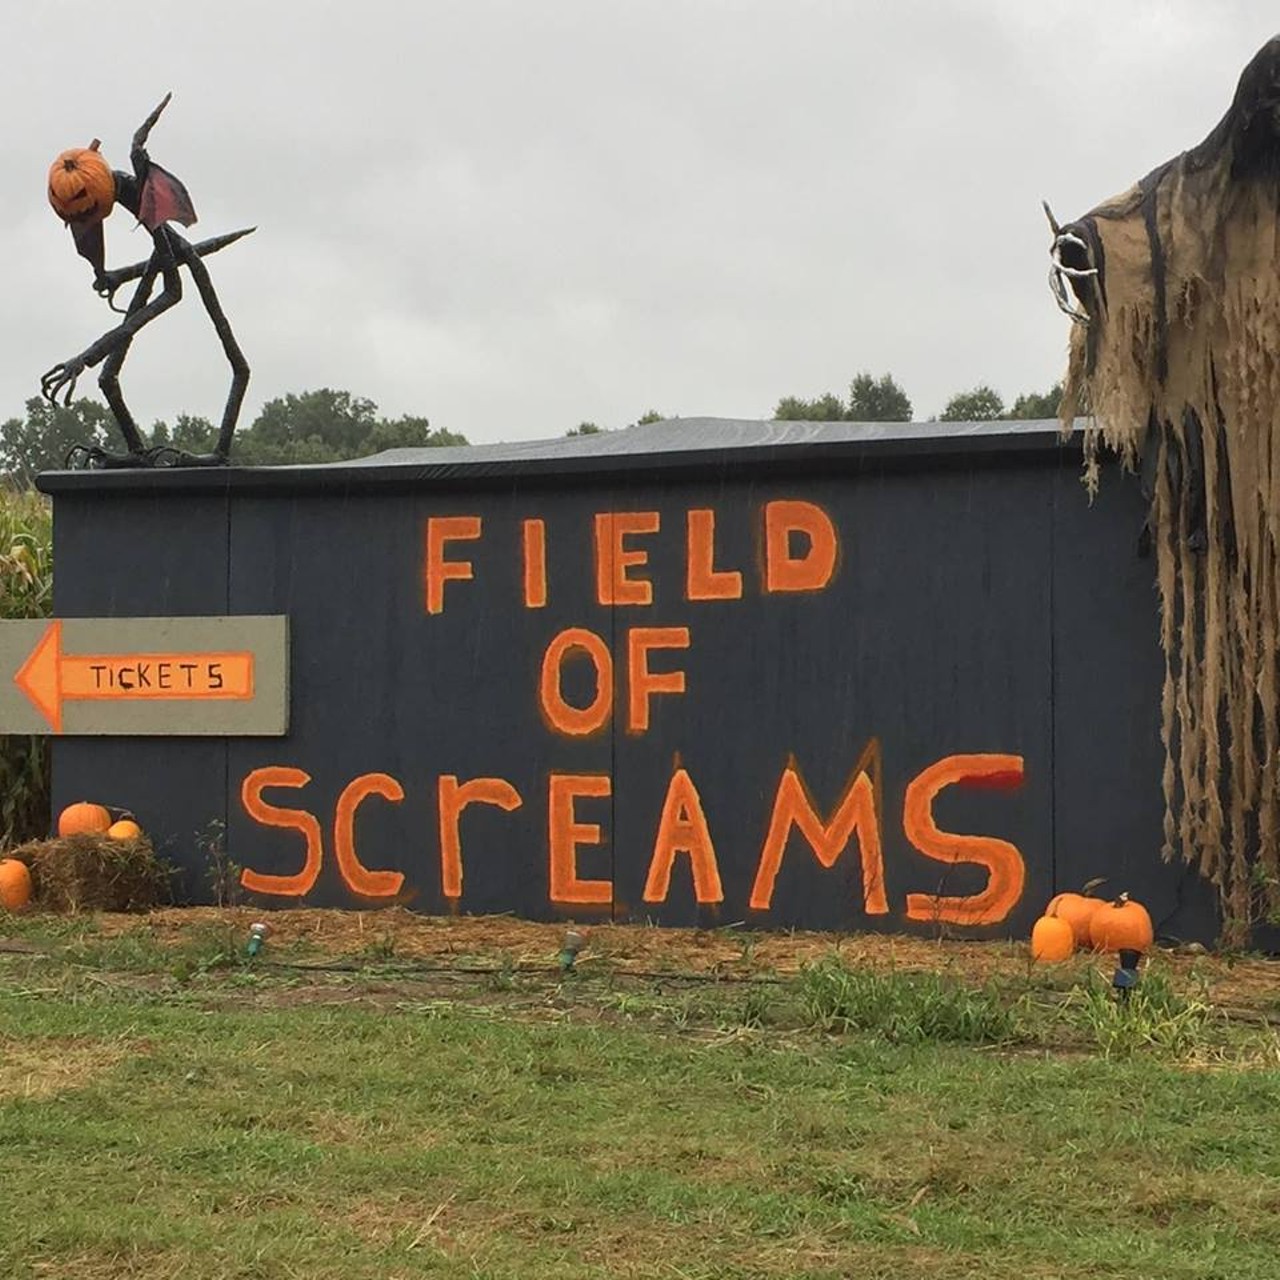 Field of Screams at Bonadeo Farms
1215 White Lake Rd, Highland Charter Twp.
248-787-4553
Another corn maze to visit is the one at Bonadeo Farms. Bonadeo has daytime activities one can enjoy with the family such as pumpkin patches, mazes, and cider and donuts. However, when the sun goes down that&#146;s when everything you love about Halloween comes into play with attractions like a haunted maze and house. Photo courtesy of Facebook